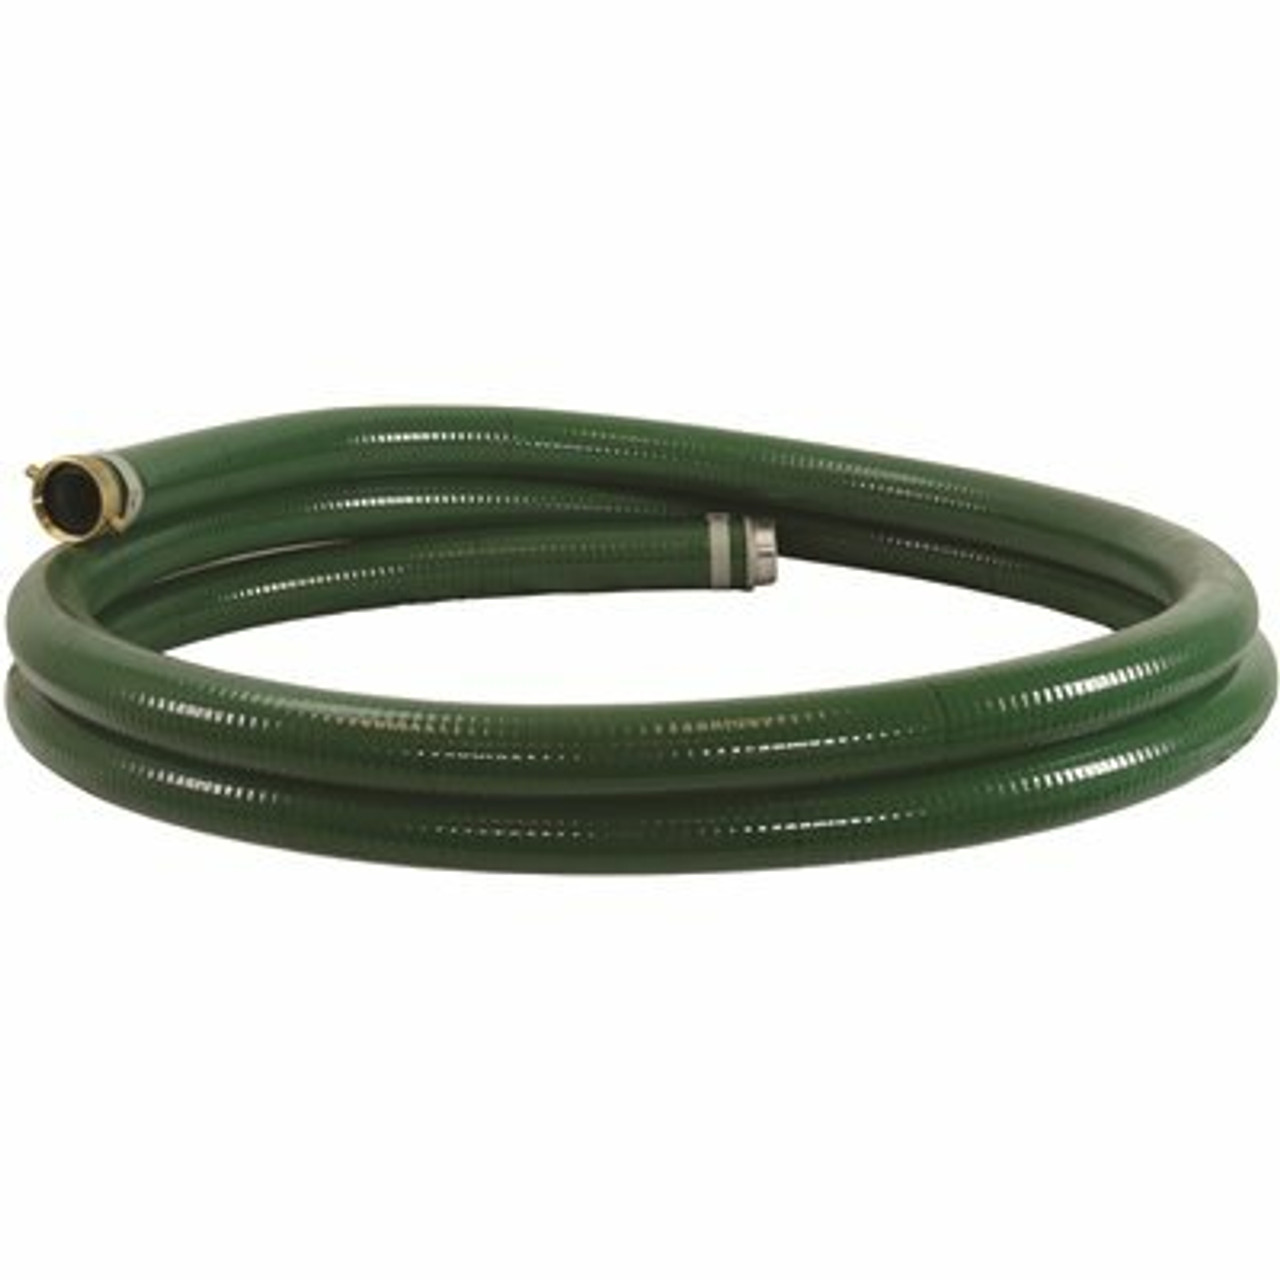 Duromax 3 In. X 20 Ft. Water Pump Suction Hose